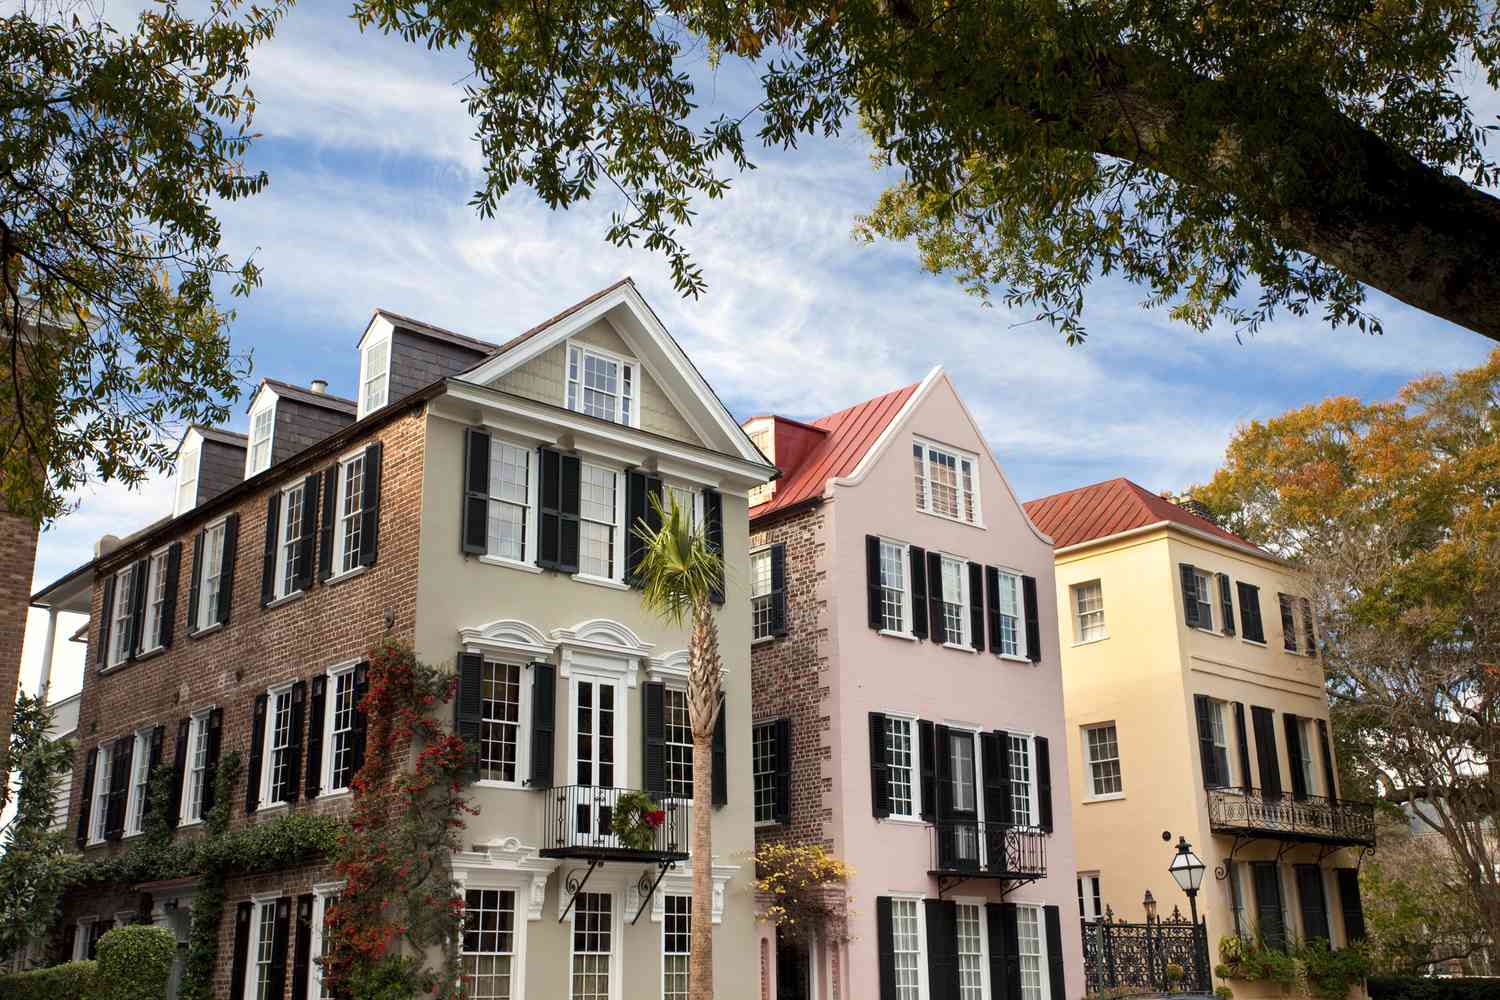 Charleston row houses with painted and brick walls